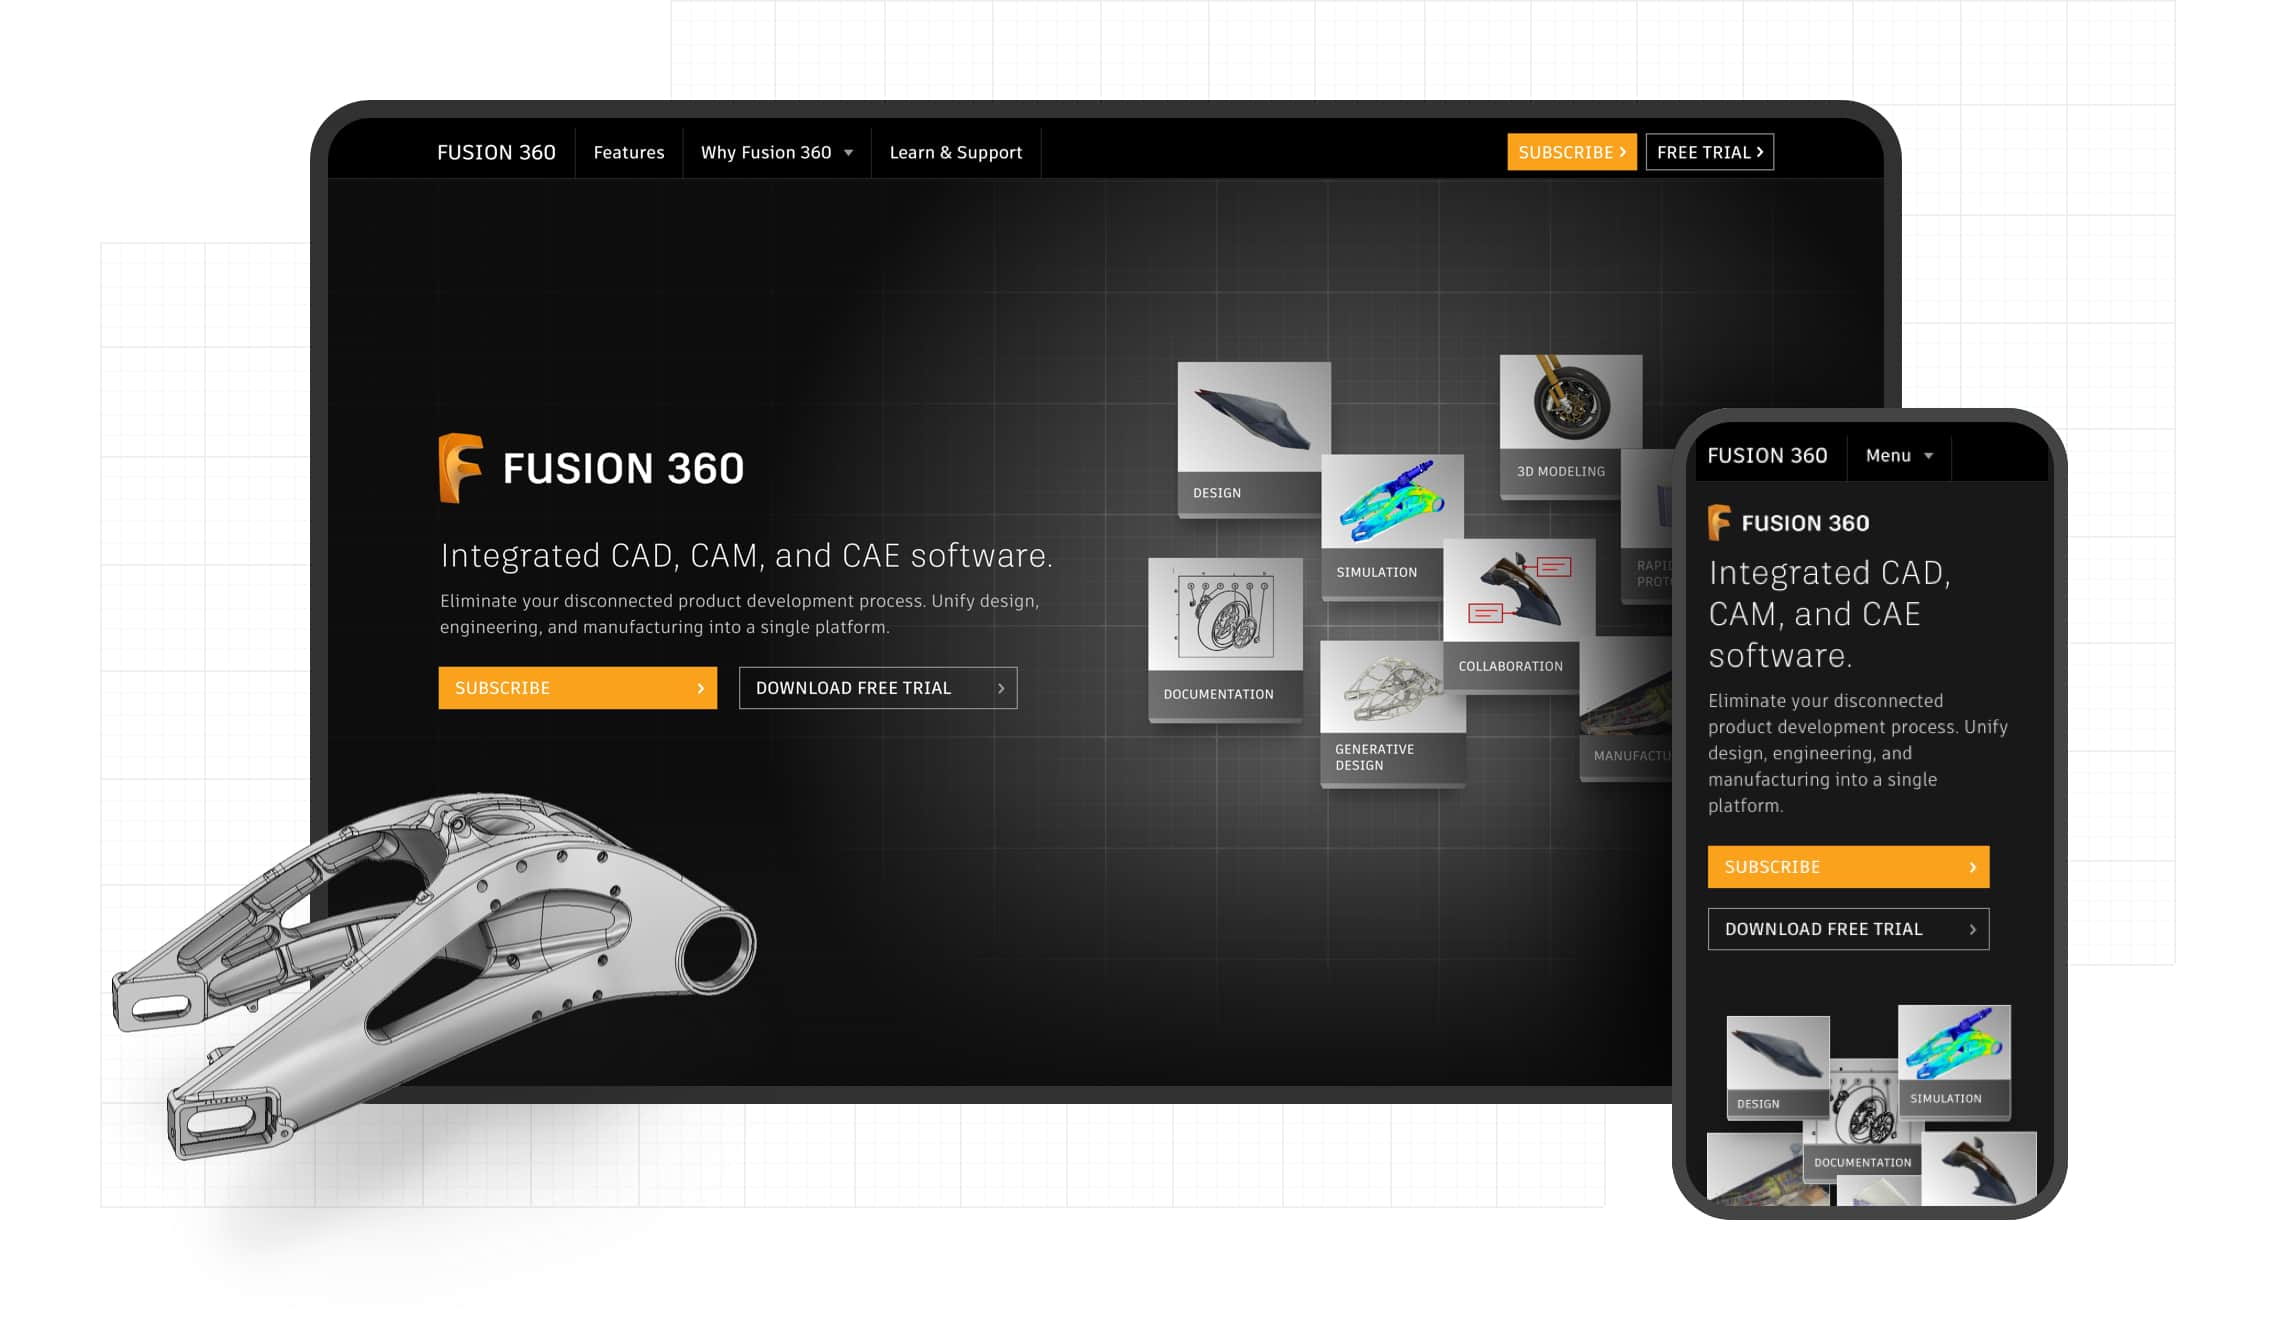 Composite image showing desktop and mobile views of the Fusion360 home page